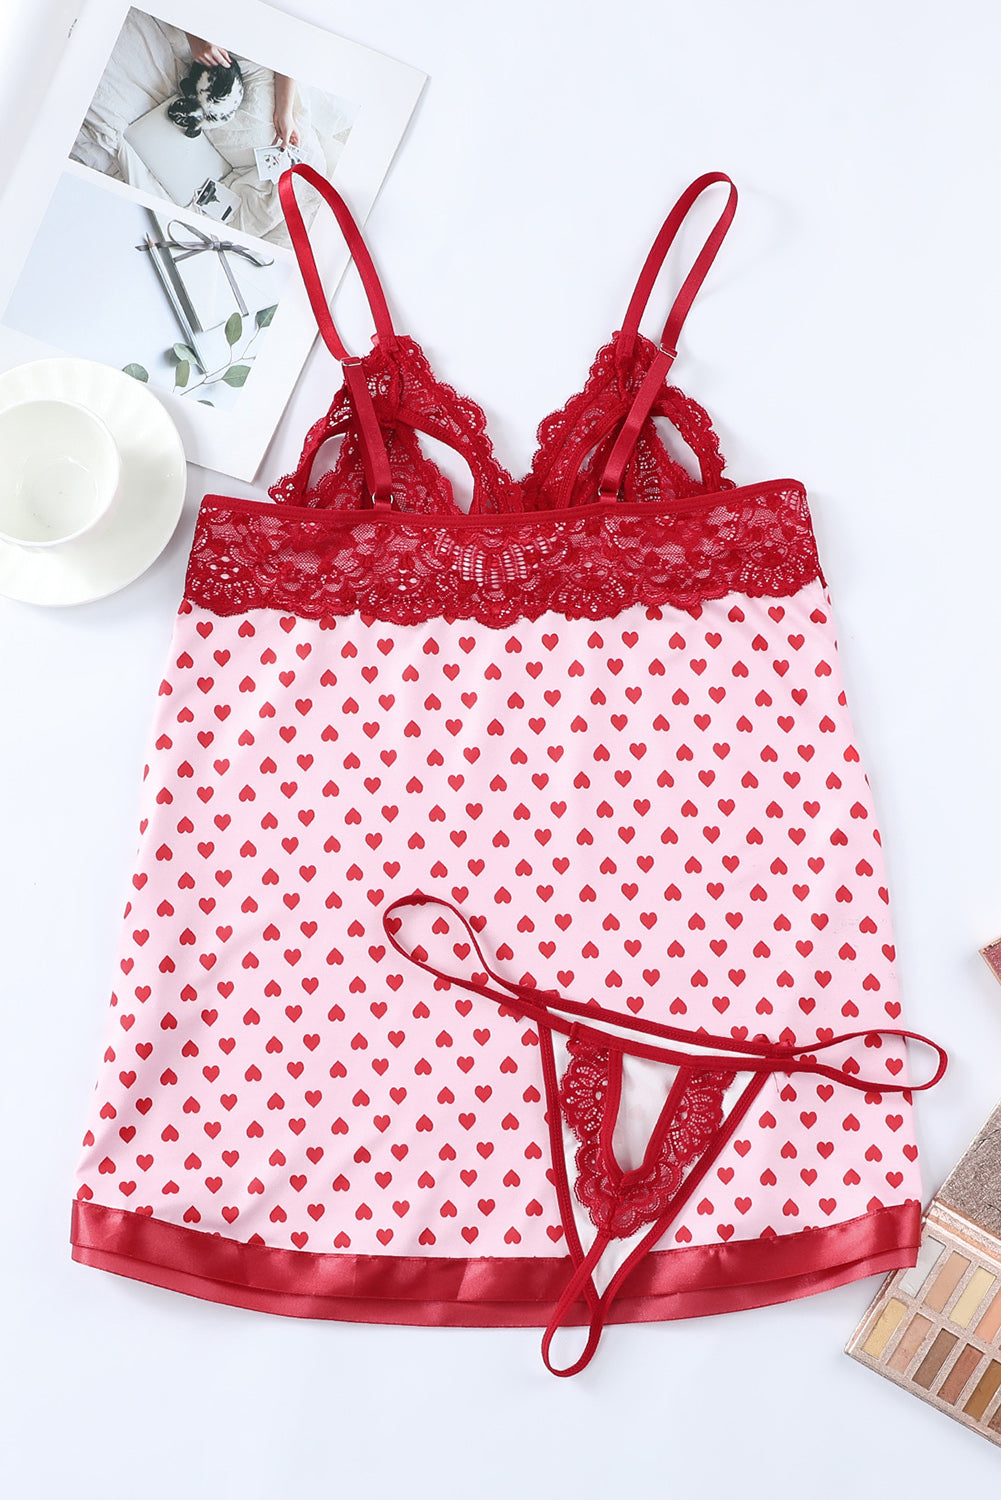 LC351064-3-S, LC351064-3-M, LC351064-3-L, Red Valentines Day Heart Shape Print Lace Crochet Babydoll Set